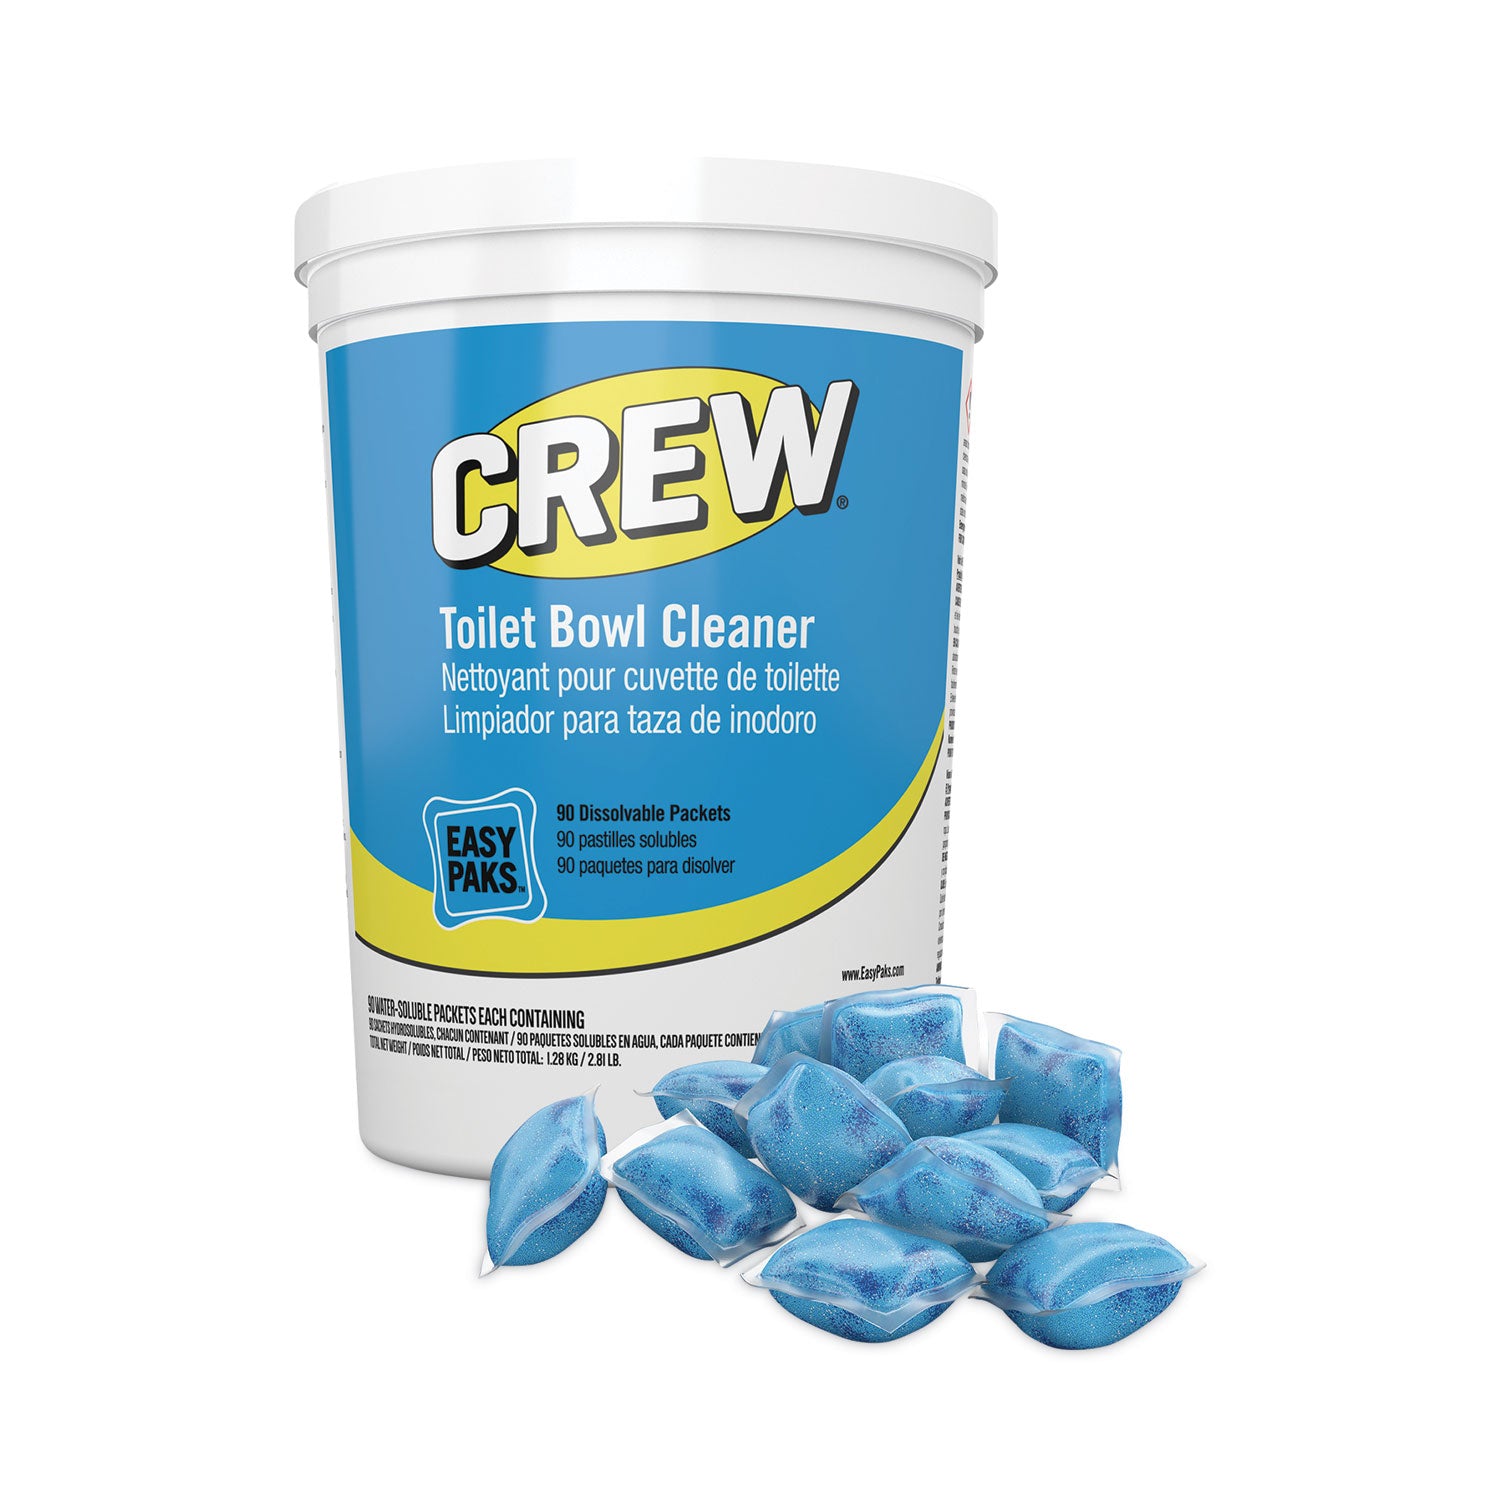 crew-easy-paks-toilet-bowl-cleaner-fresh-floral-scent-05-oz-packet-90-packets-tub-2-tubs-carton_dvocbd540731 - 1